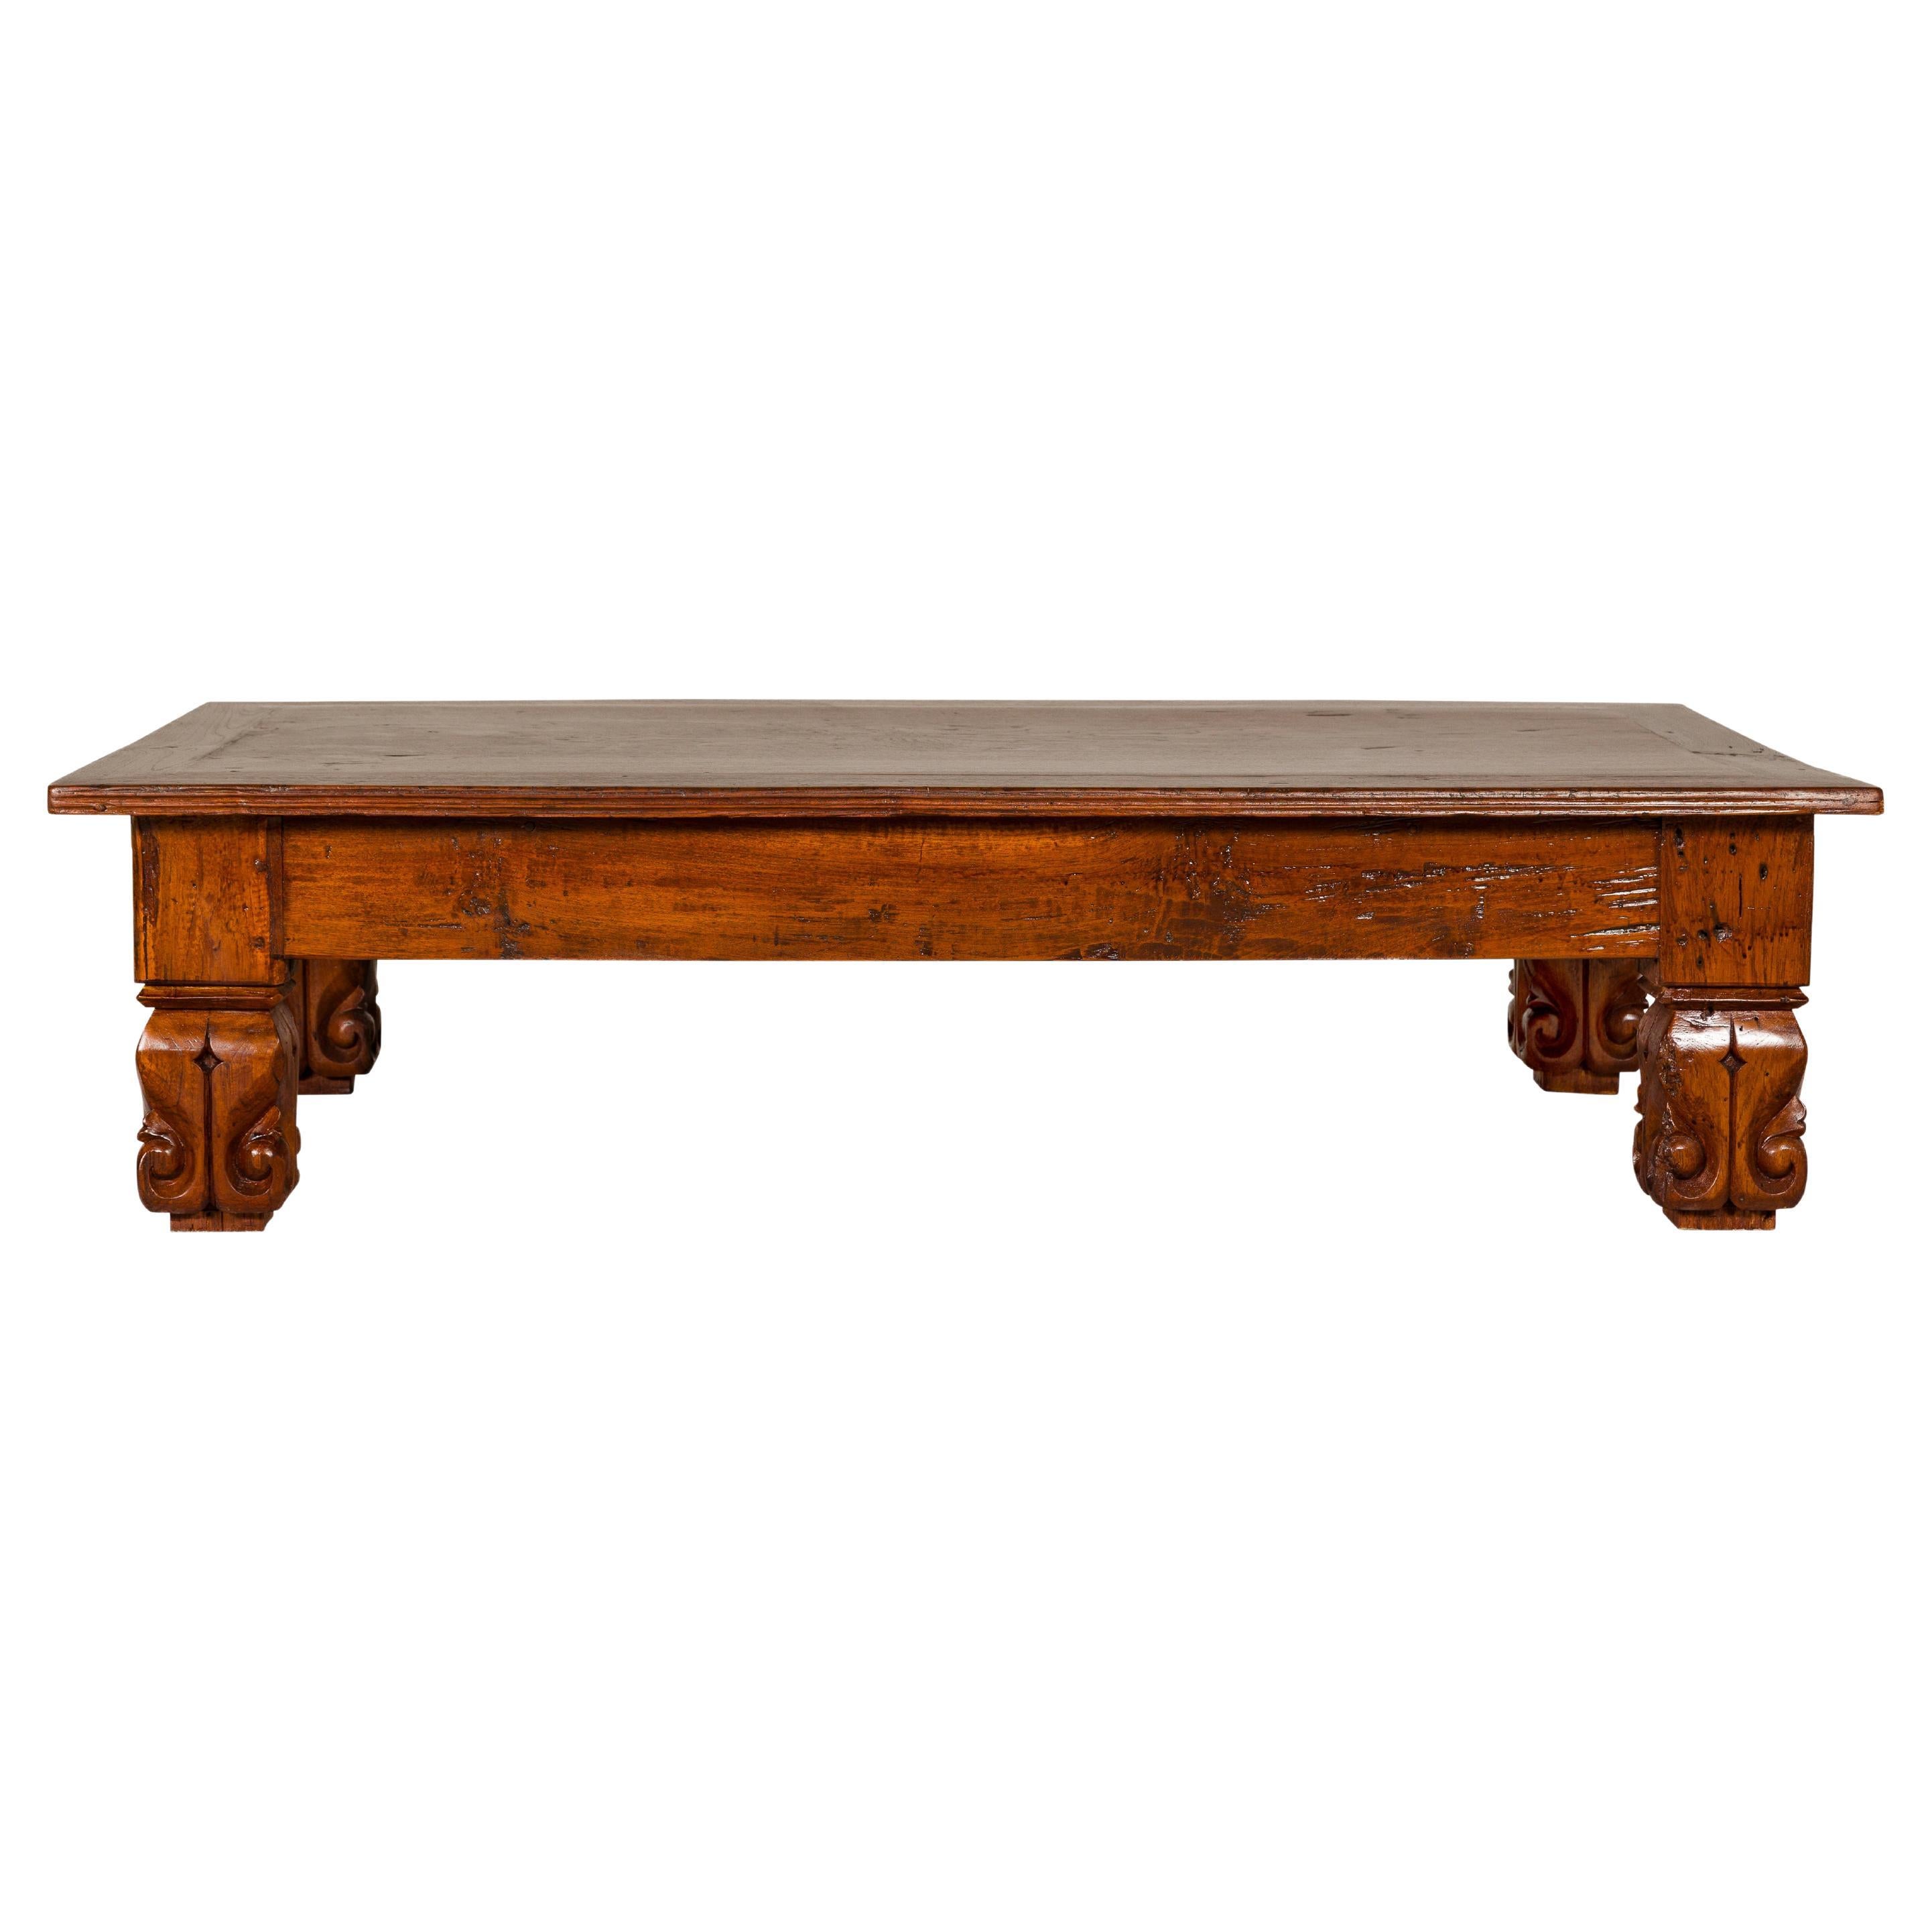 19th Century Teak Brown Wood Low Coffee Table with Scroll Carved Legs For Sale